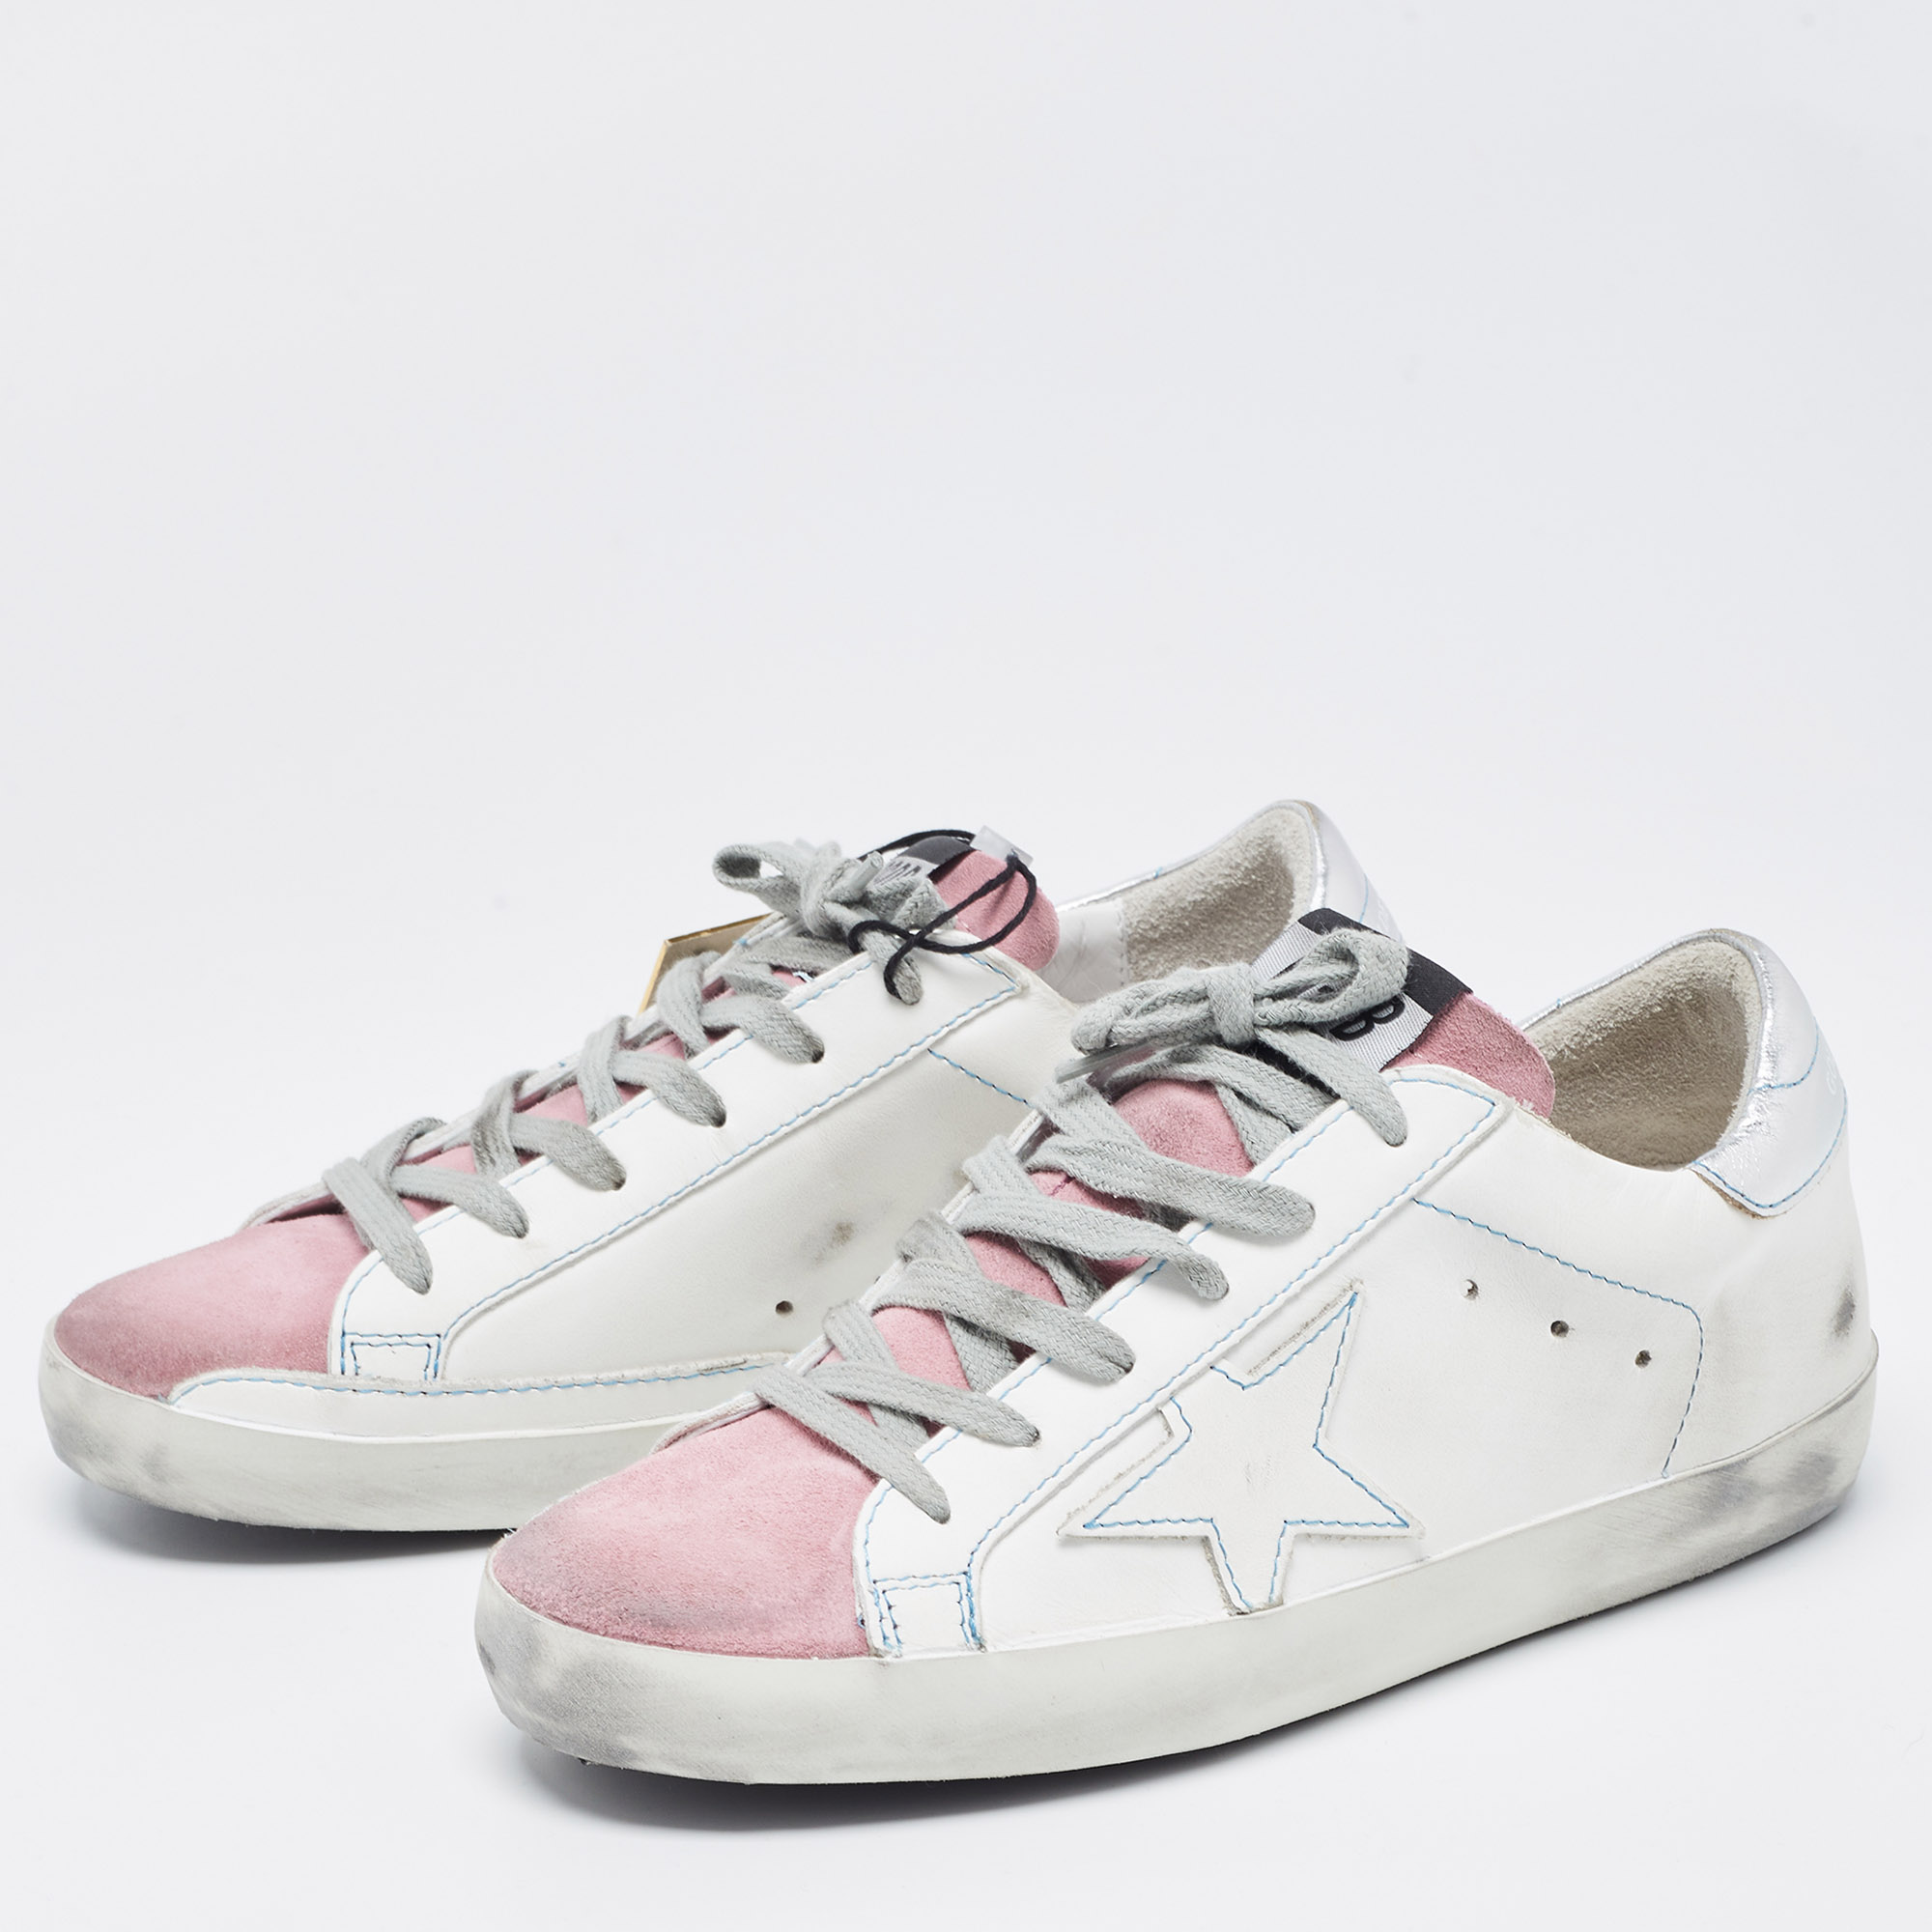 

Golden Goose Tricolor Suede and Leather Superstar Sneakers Size, White